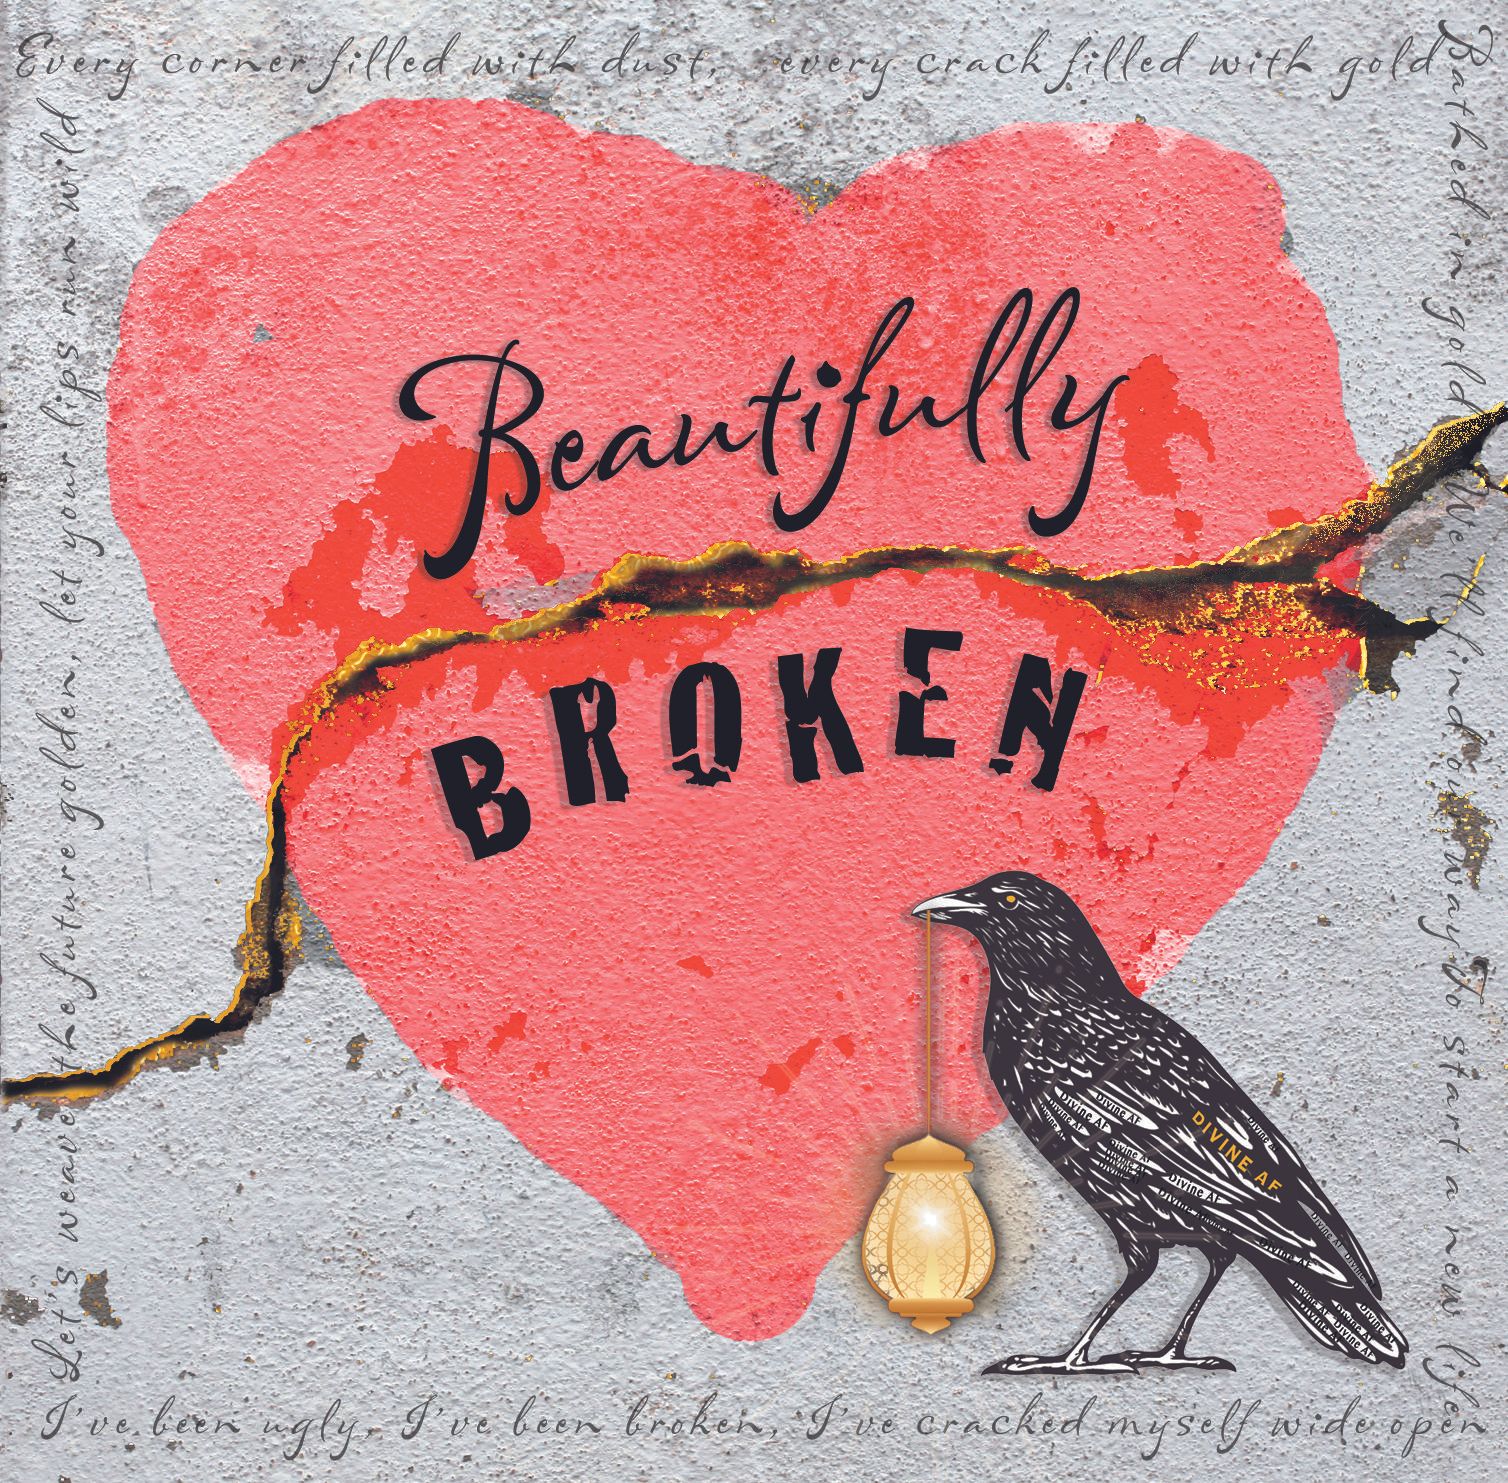 New Album " Beautifully Broken" Out Now!